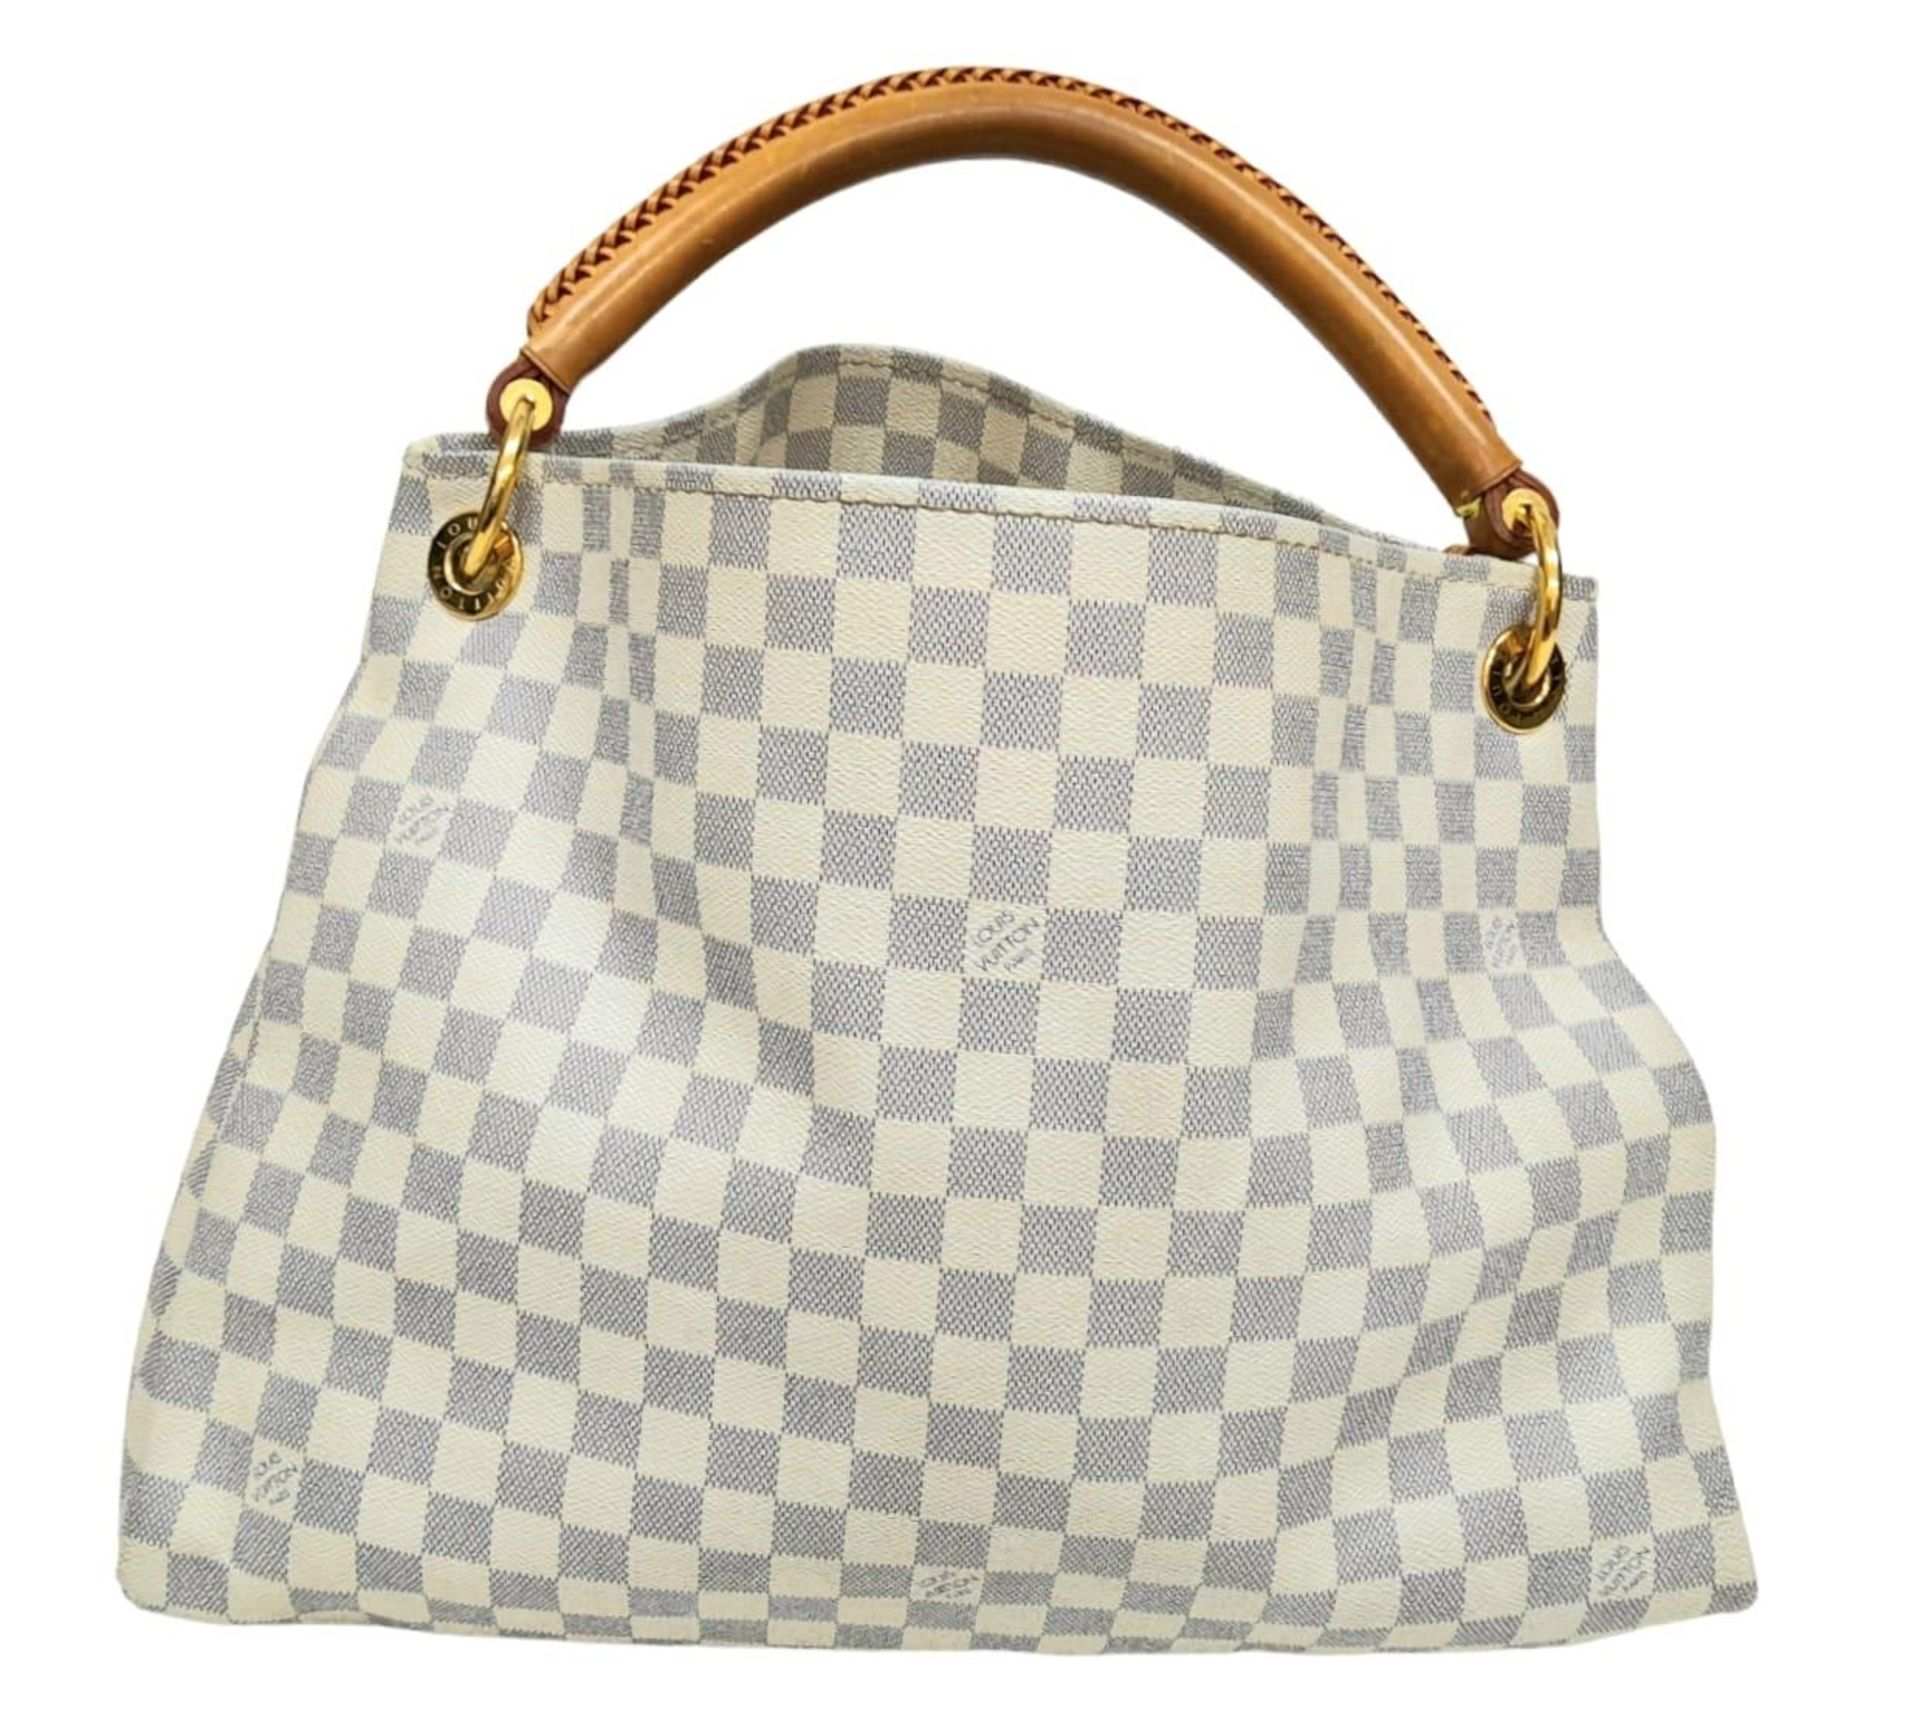 A Louis Vuitton Artsy Damier Azur Canvas Bag. Leather Exterior with Gold-tone Hardware, Short - Image 3 of 7